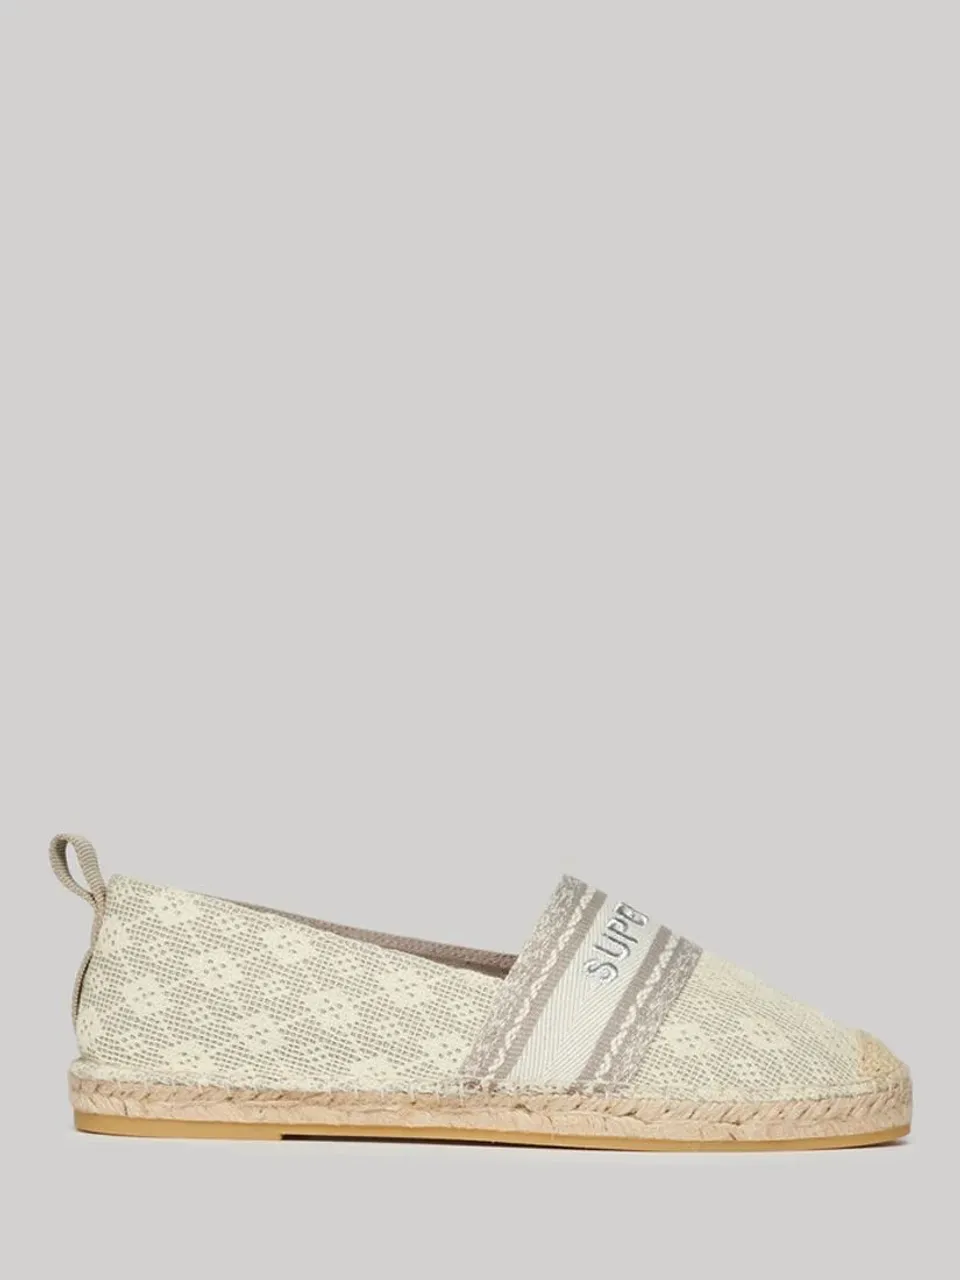 Superdry Canvas Lace Overlay Espadrilles - Moon Rock Grey - Female